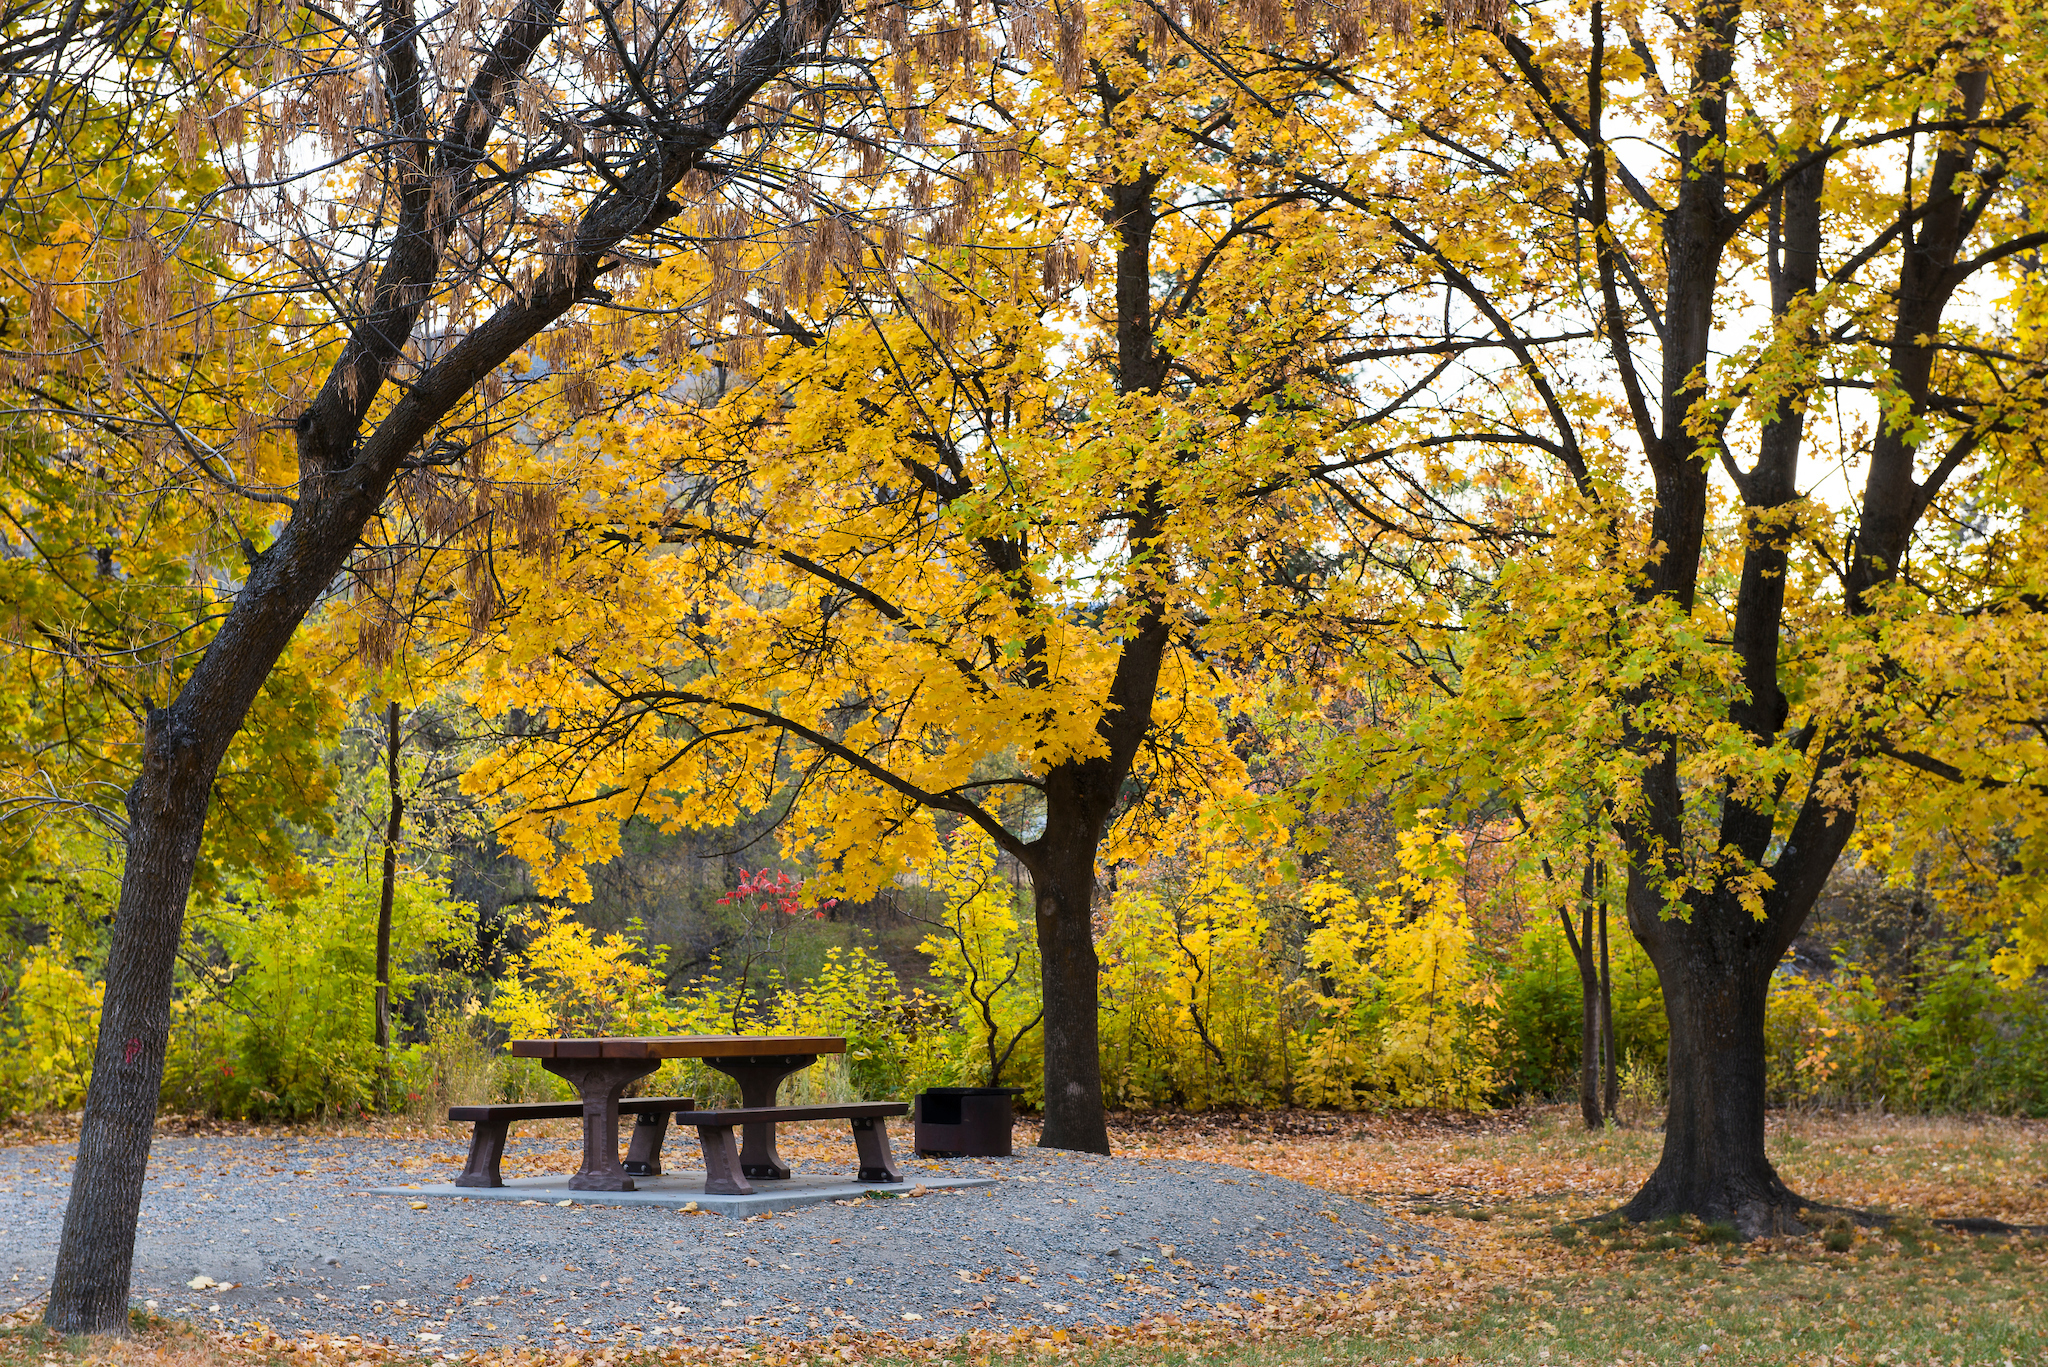 A bench and firepit at a frontcountry campsite centered around large trees with fall foliage